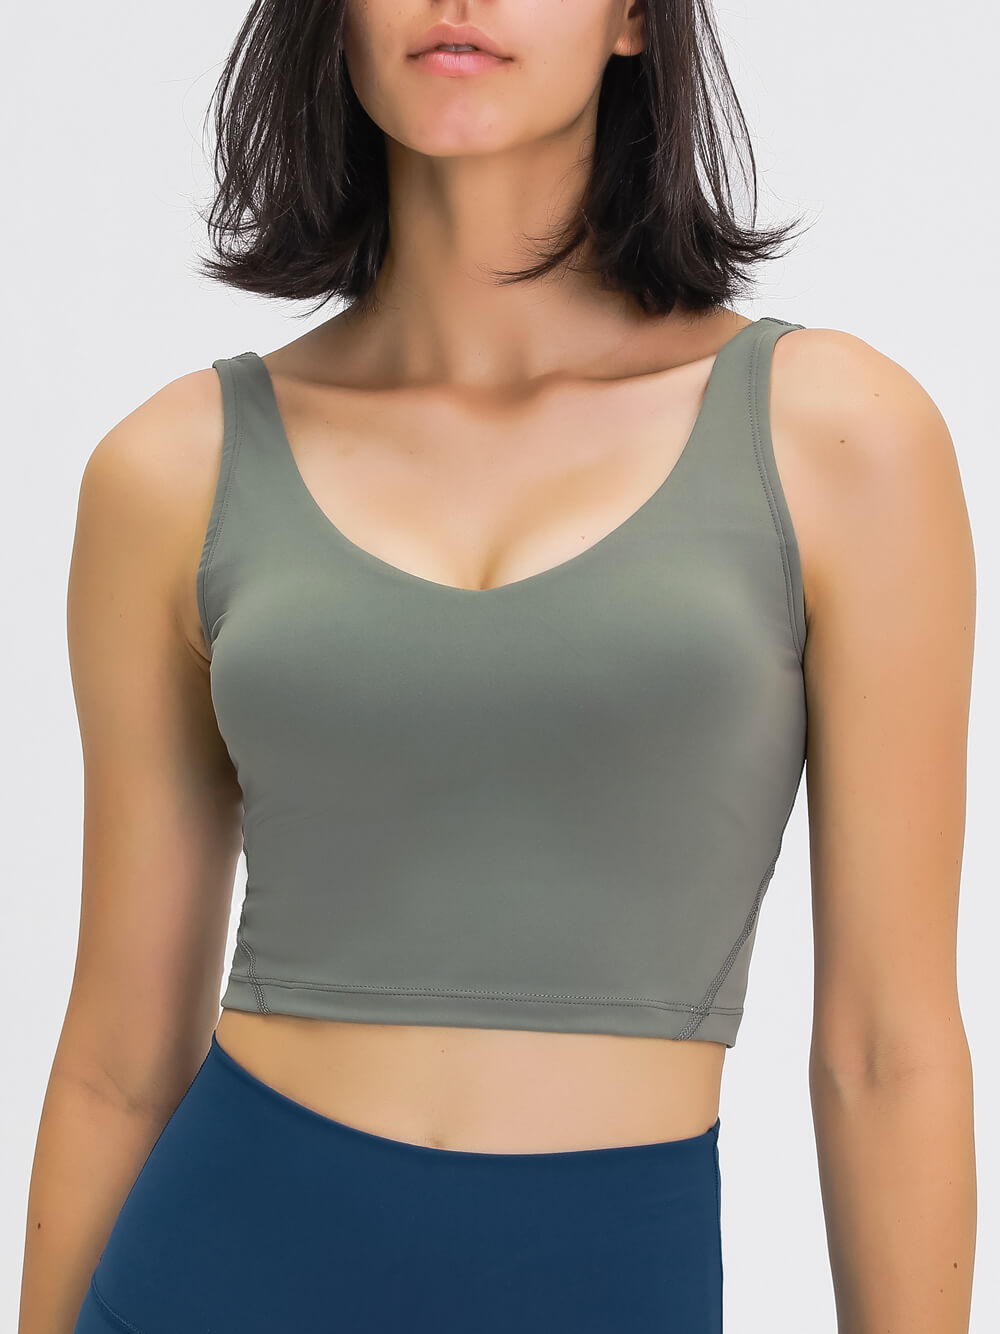  MIER Longline Sports Bra Women Padded Crop Tank Tops Built in  Bra Workout Athletic Yoga Gym Brown Green, XS : Clothing, Shoes & Jewelry